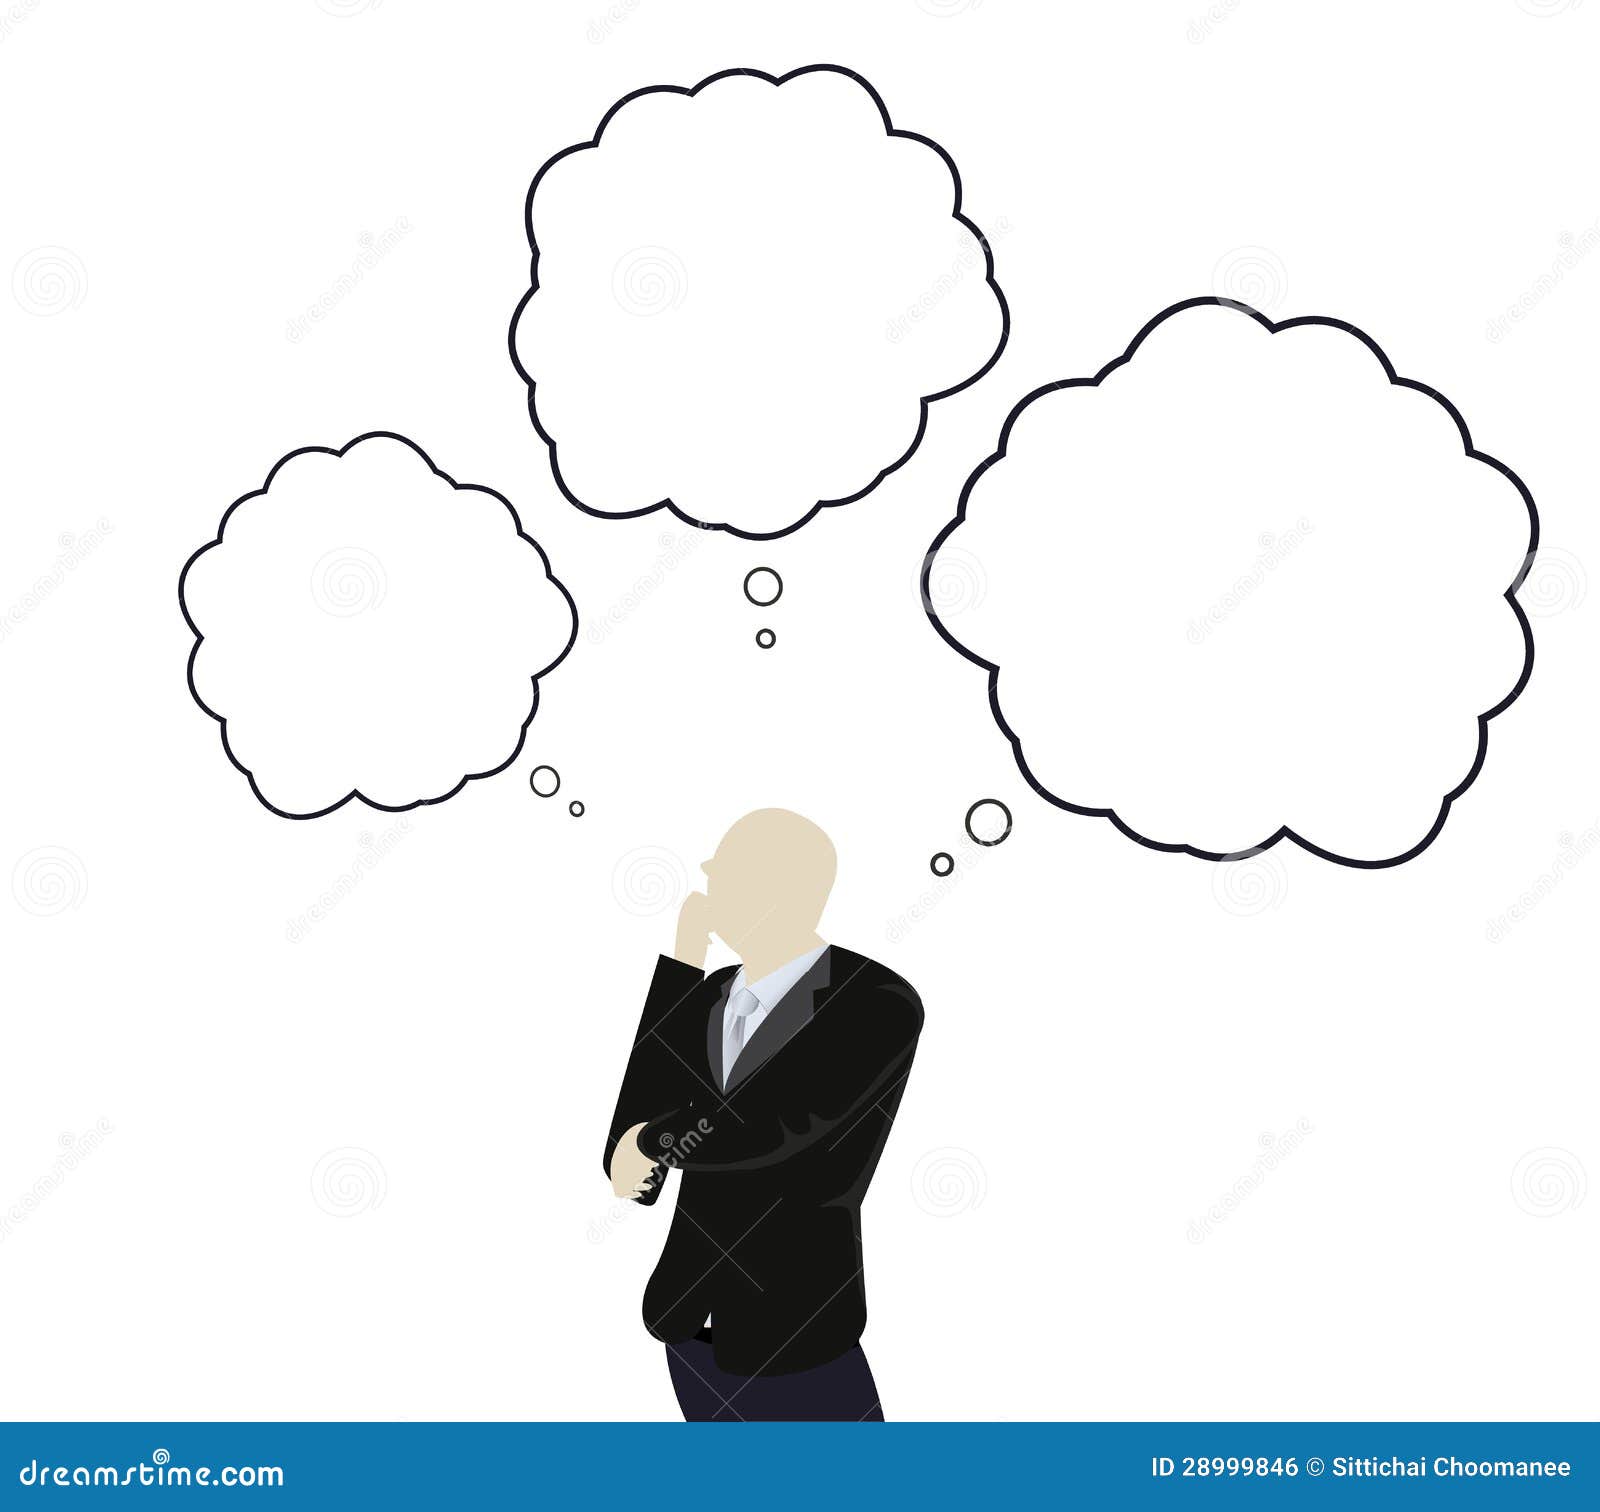 clipart of businessman thinking - photo #30